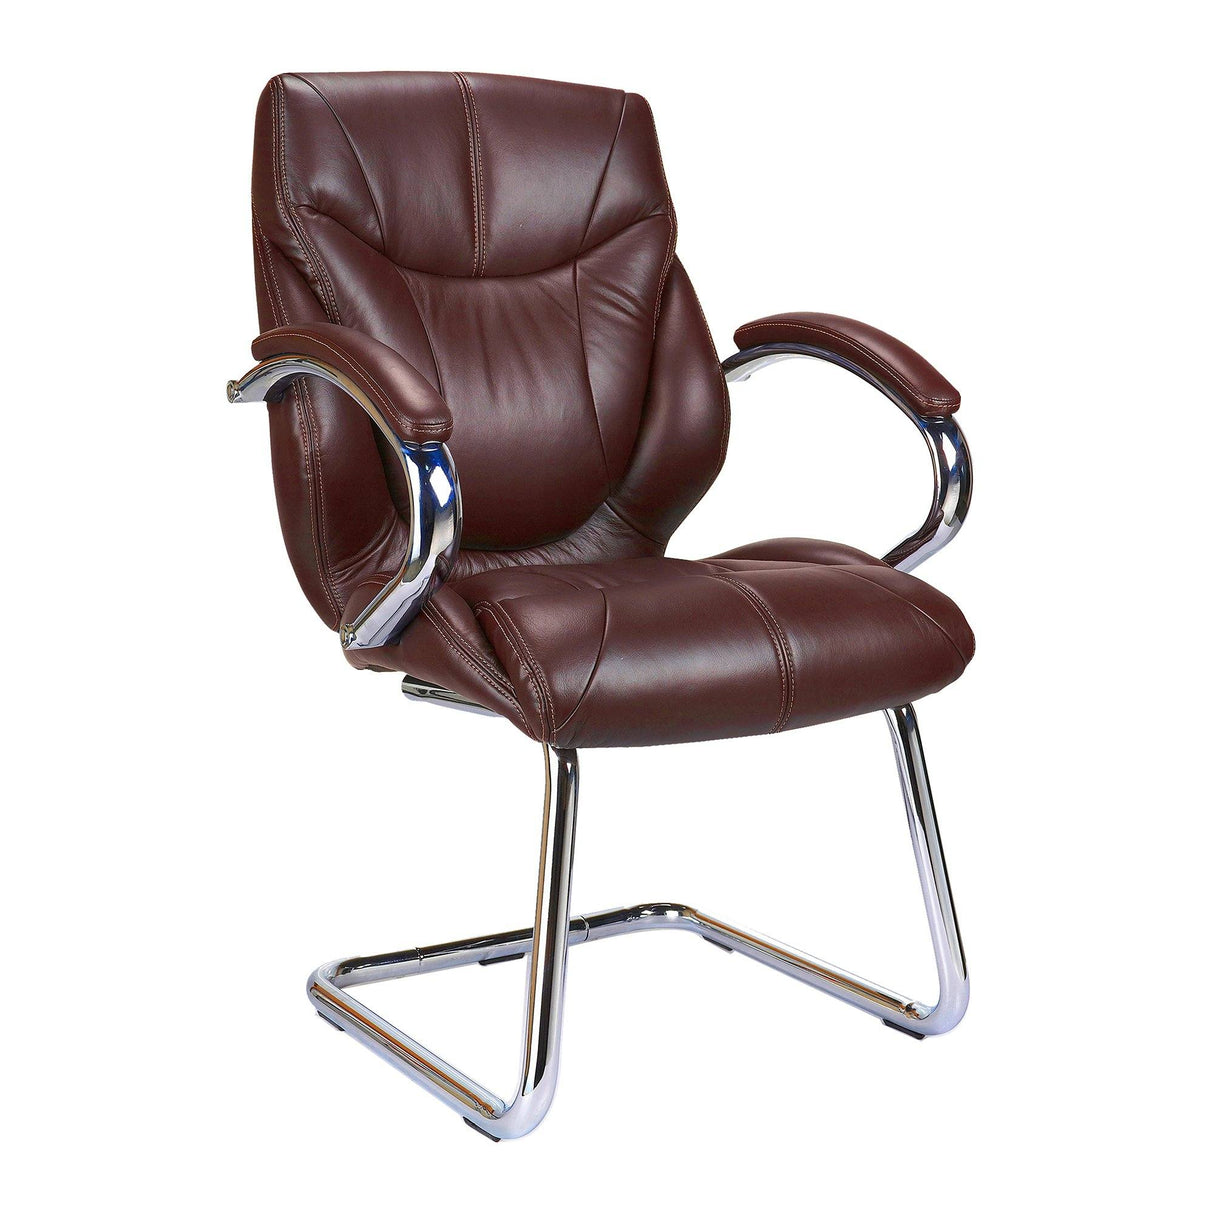 Nautilus Designs Sandown High Back Luxurious Leather Faced Executive Visitor Armchair with Integral headrest and Chrome Base - Brown